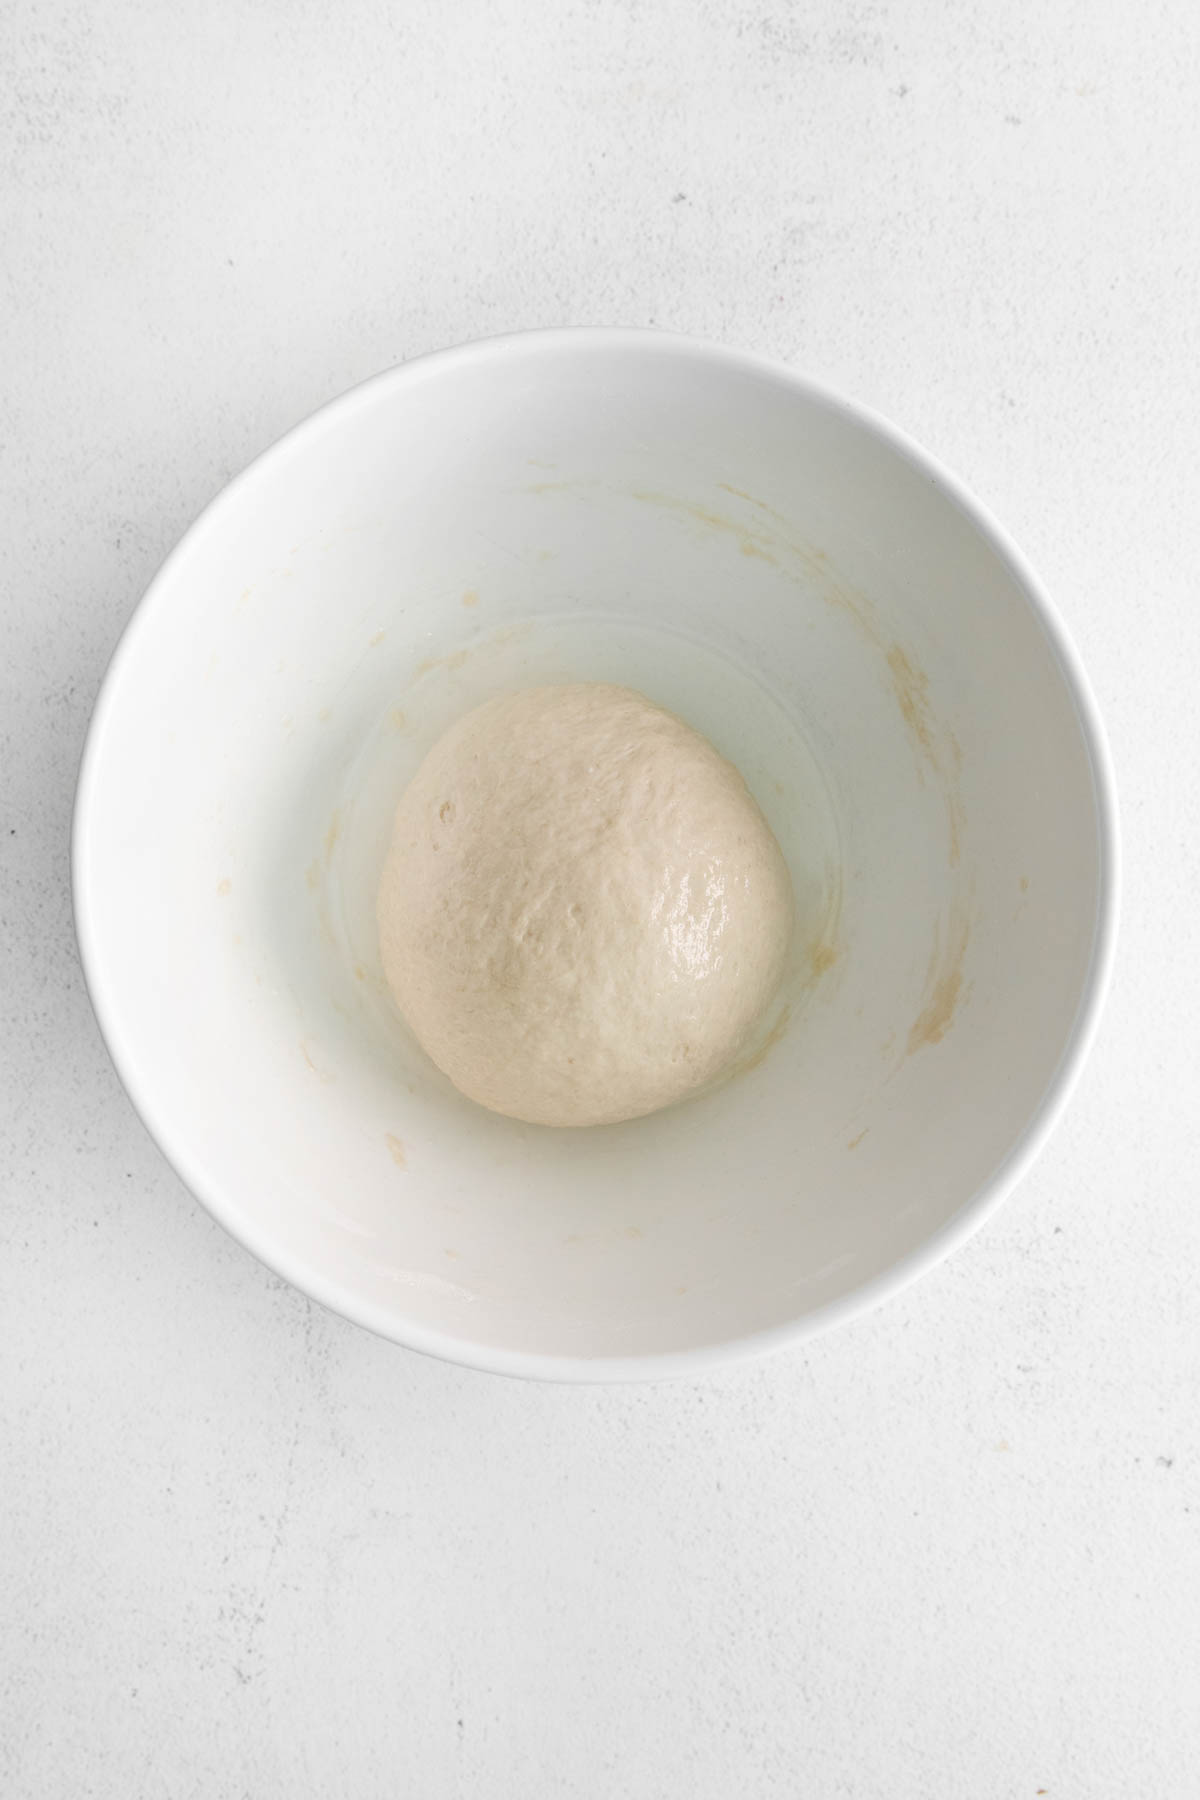 A ball of soft pretzel dough in a white bowl before rising and doubling in volume.